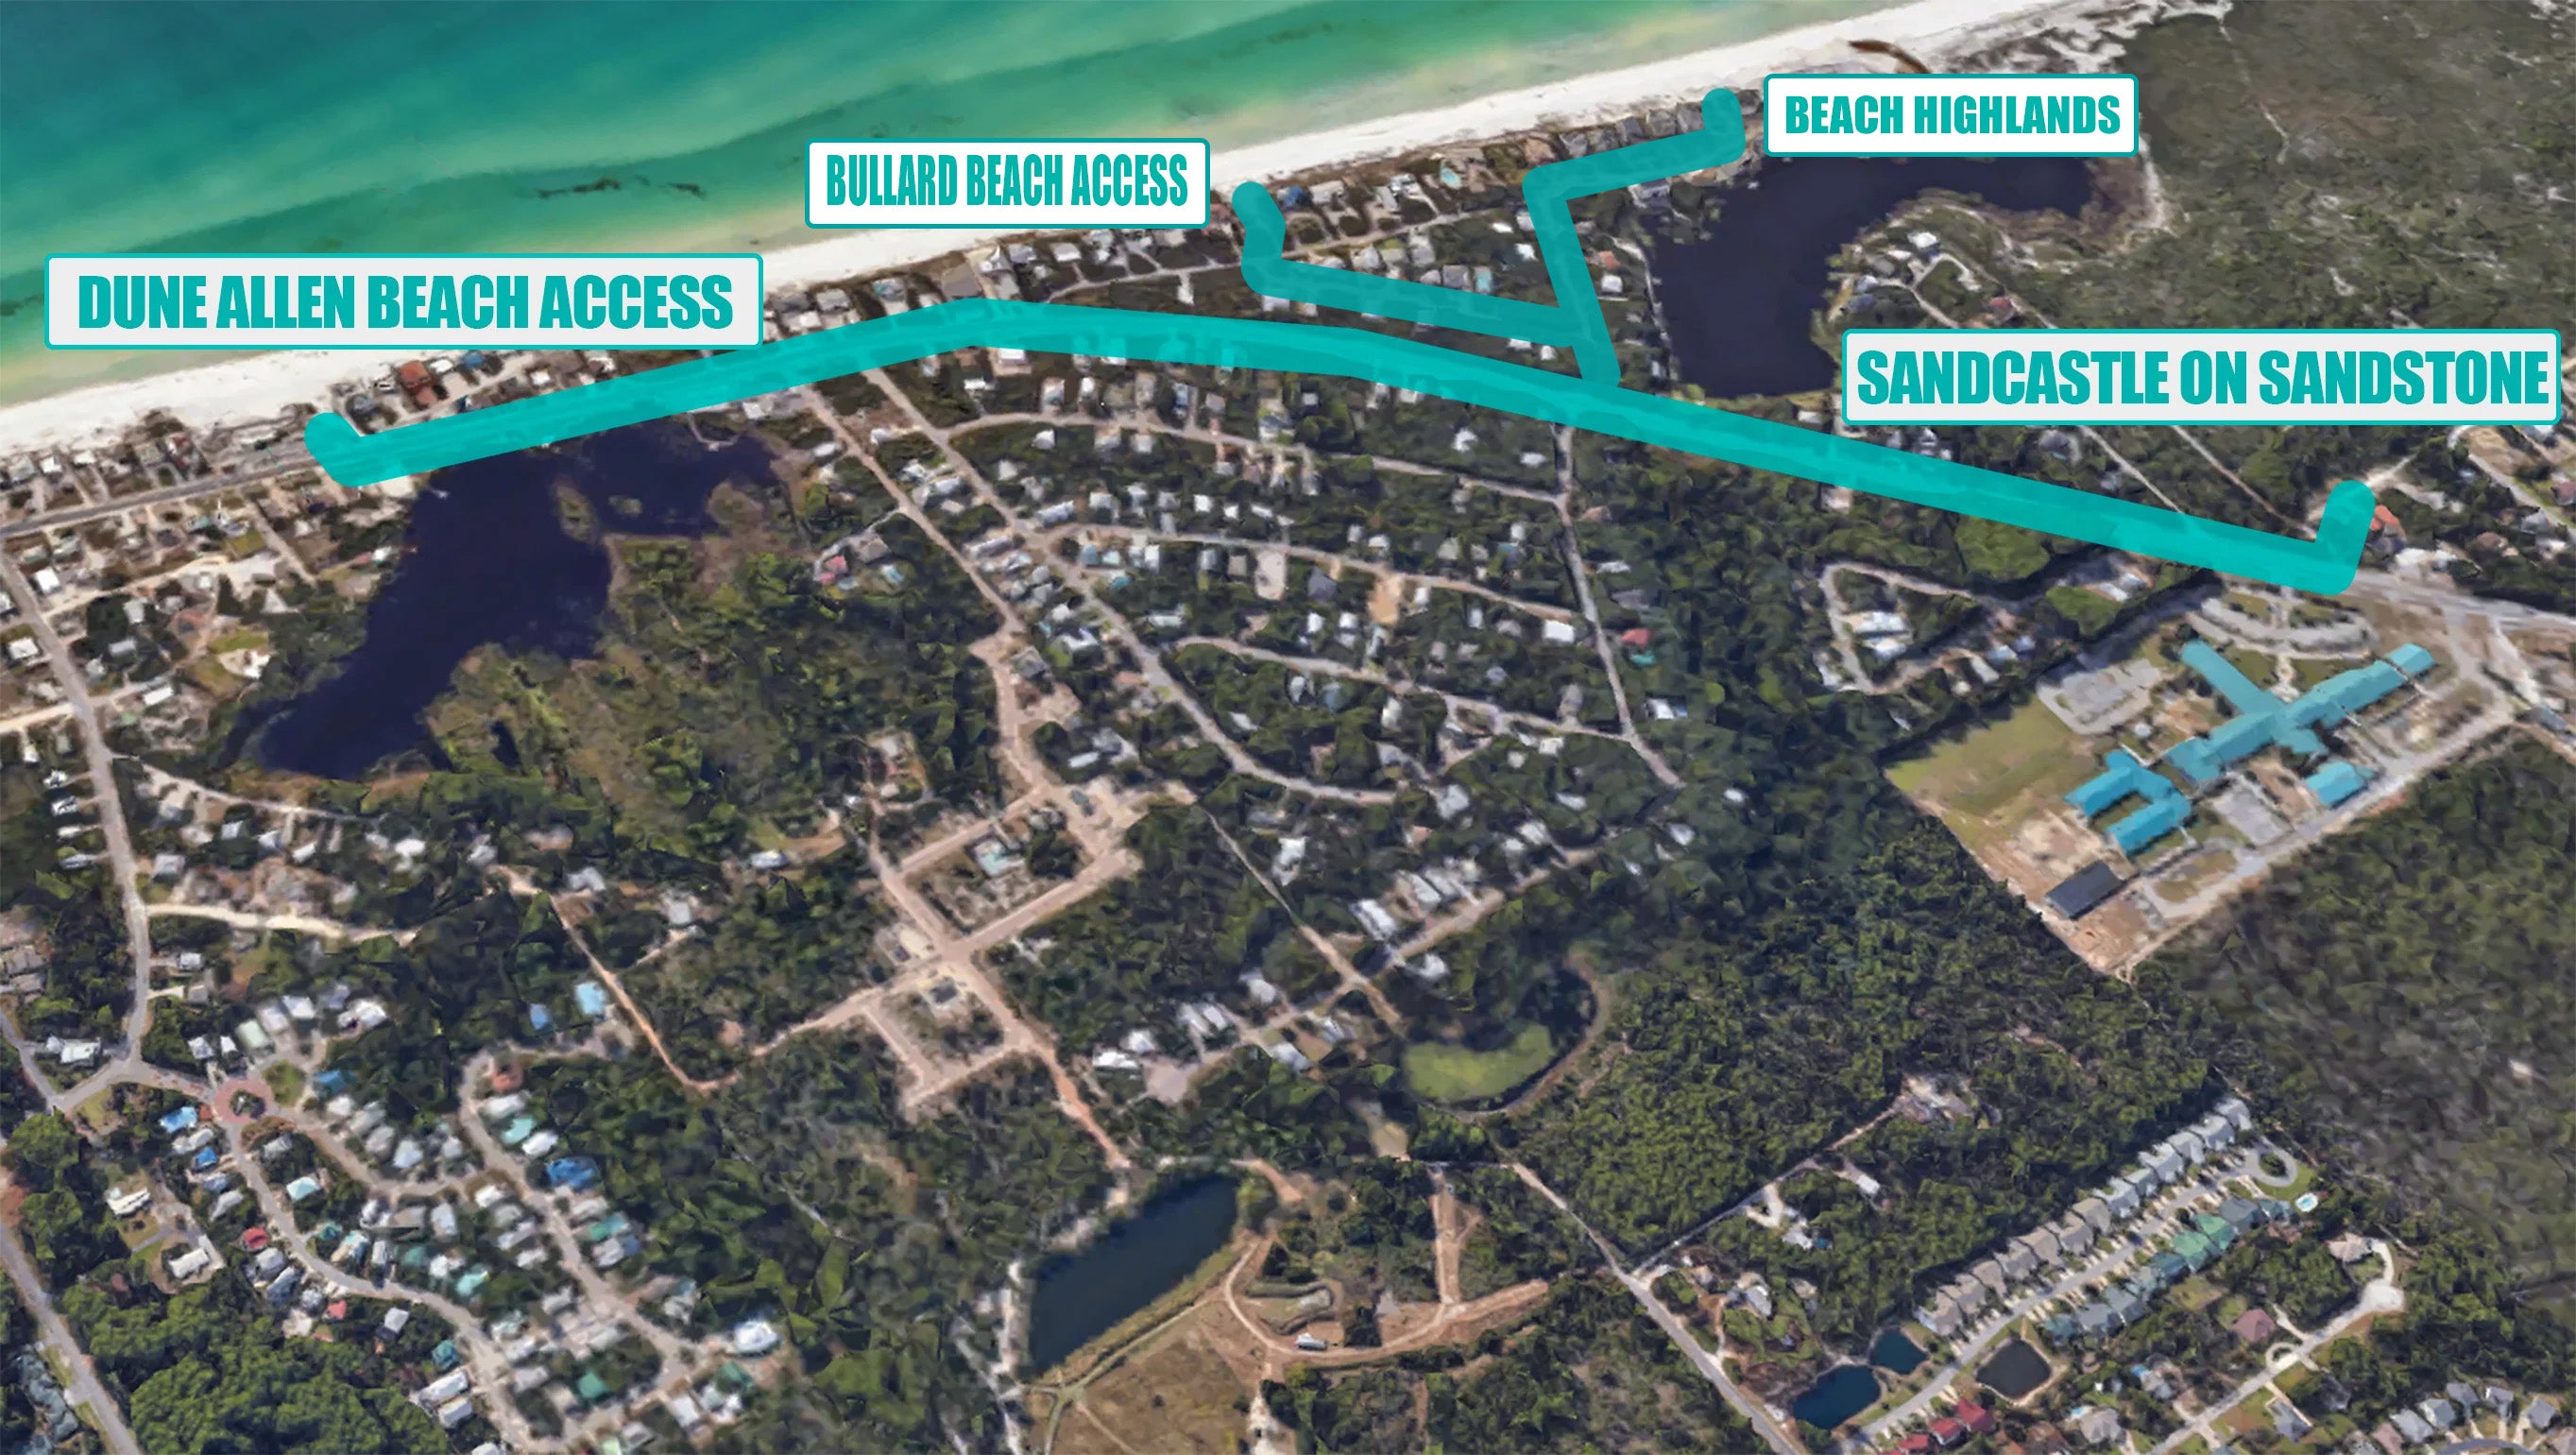 6 Beach Access Points within 1 Mile & 3 within 1/2 Mile